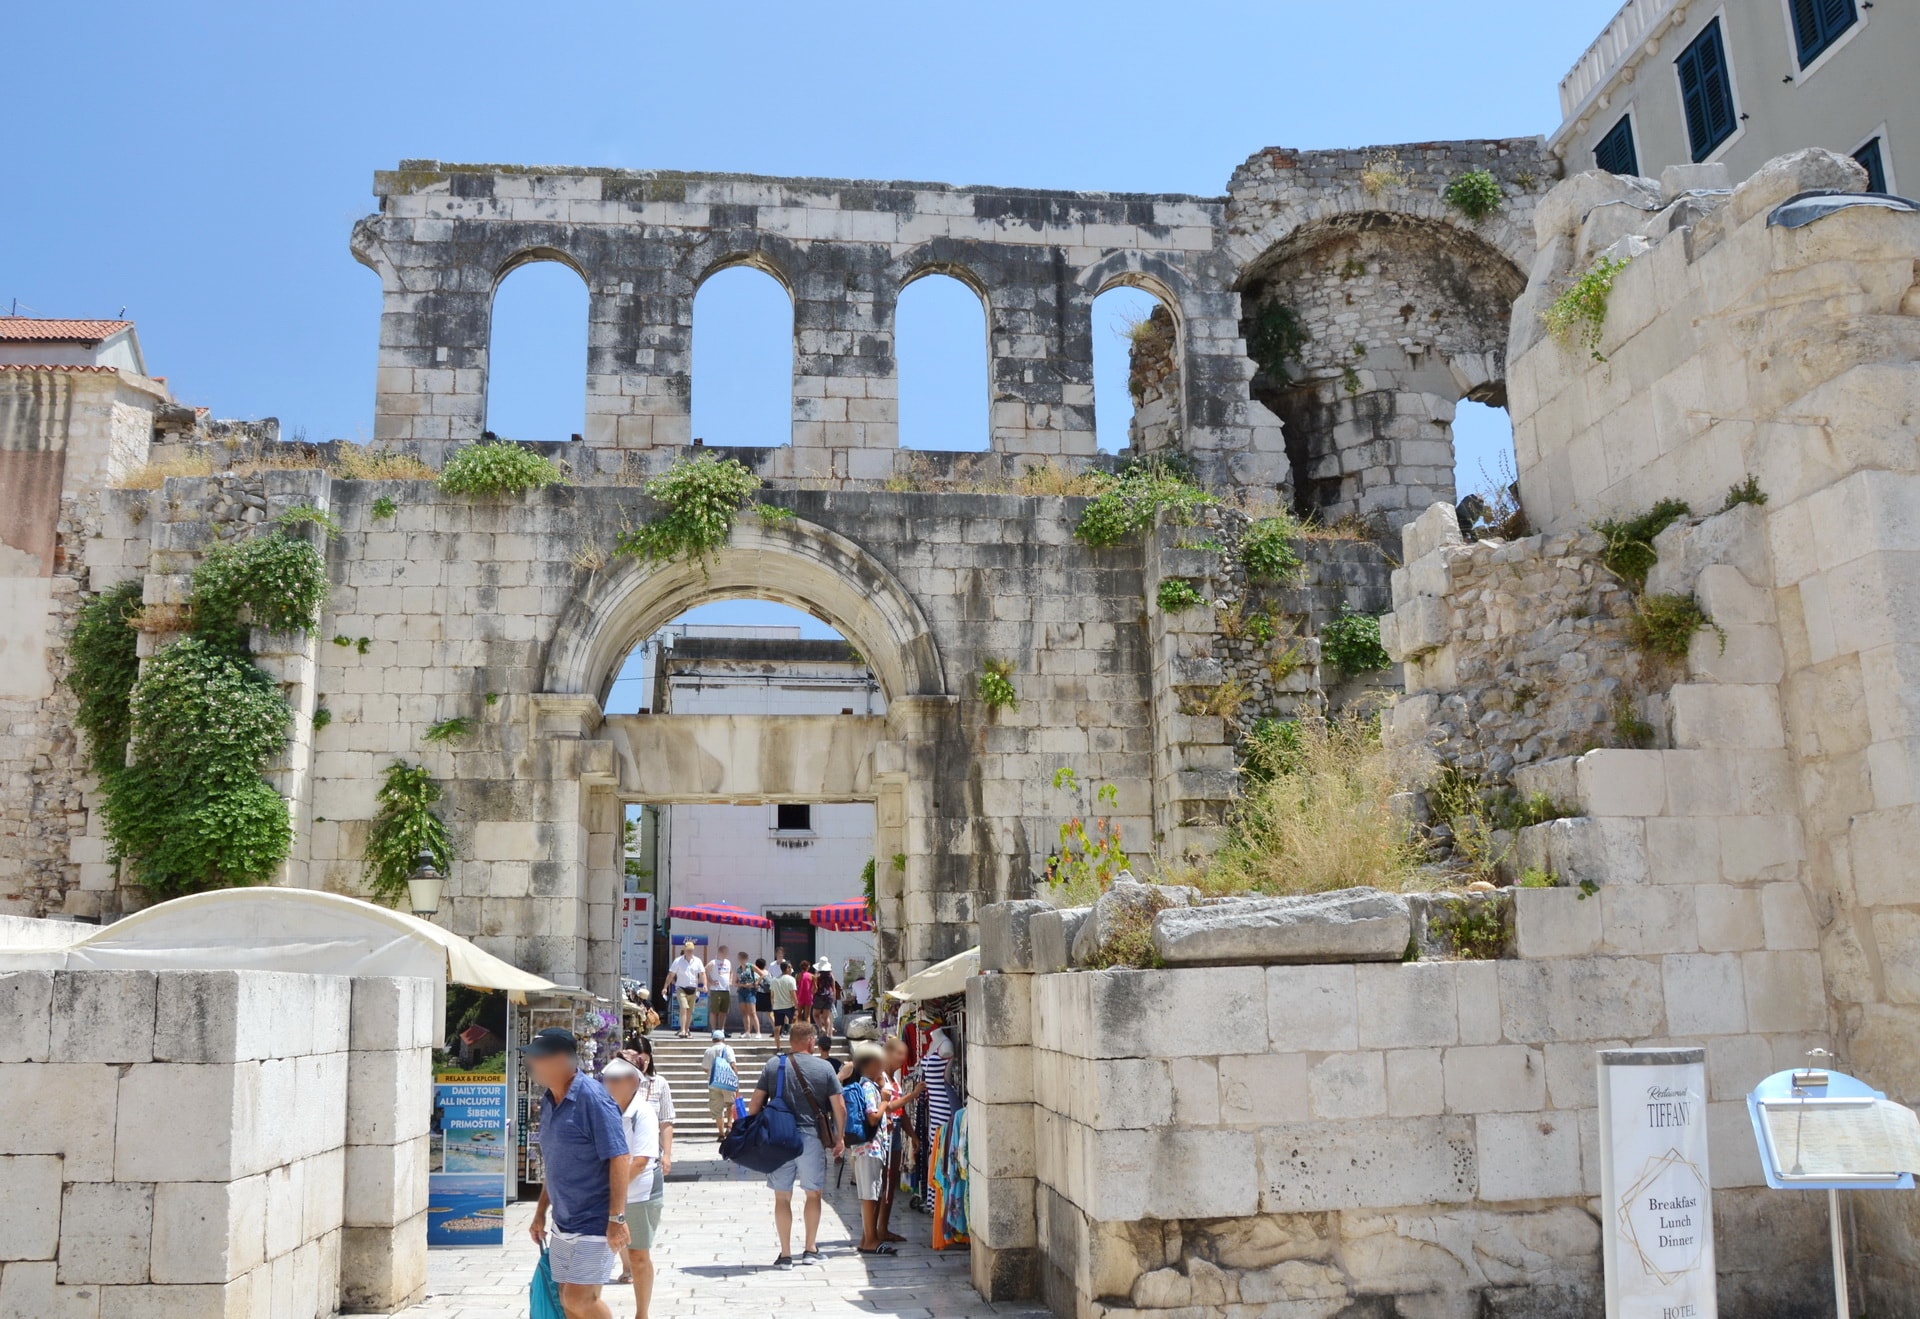 Diocletian's Palace ruins in Split